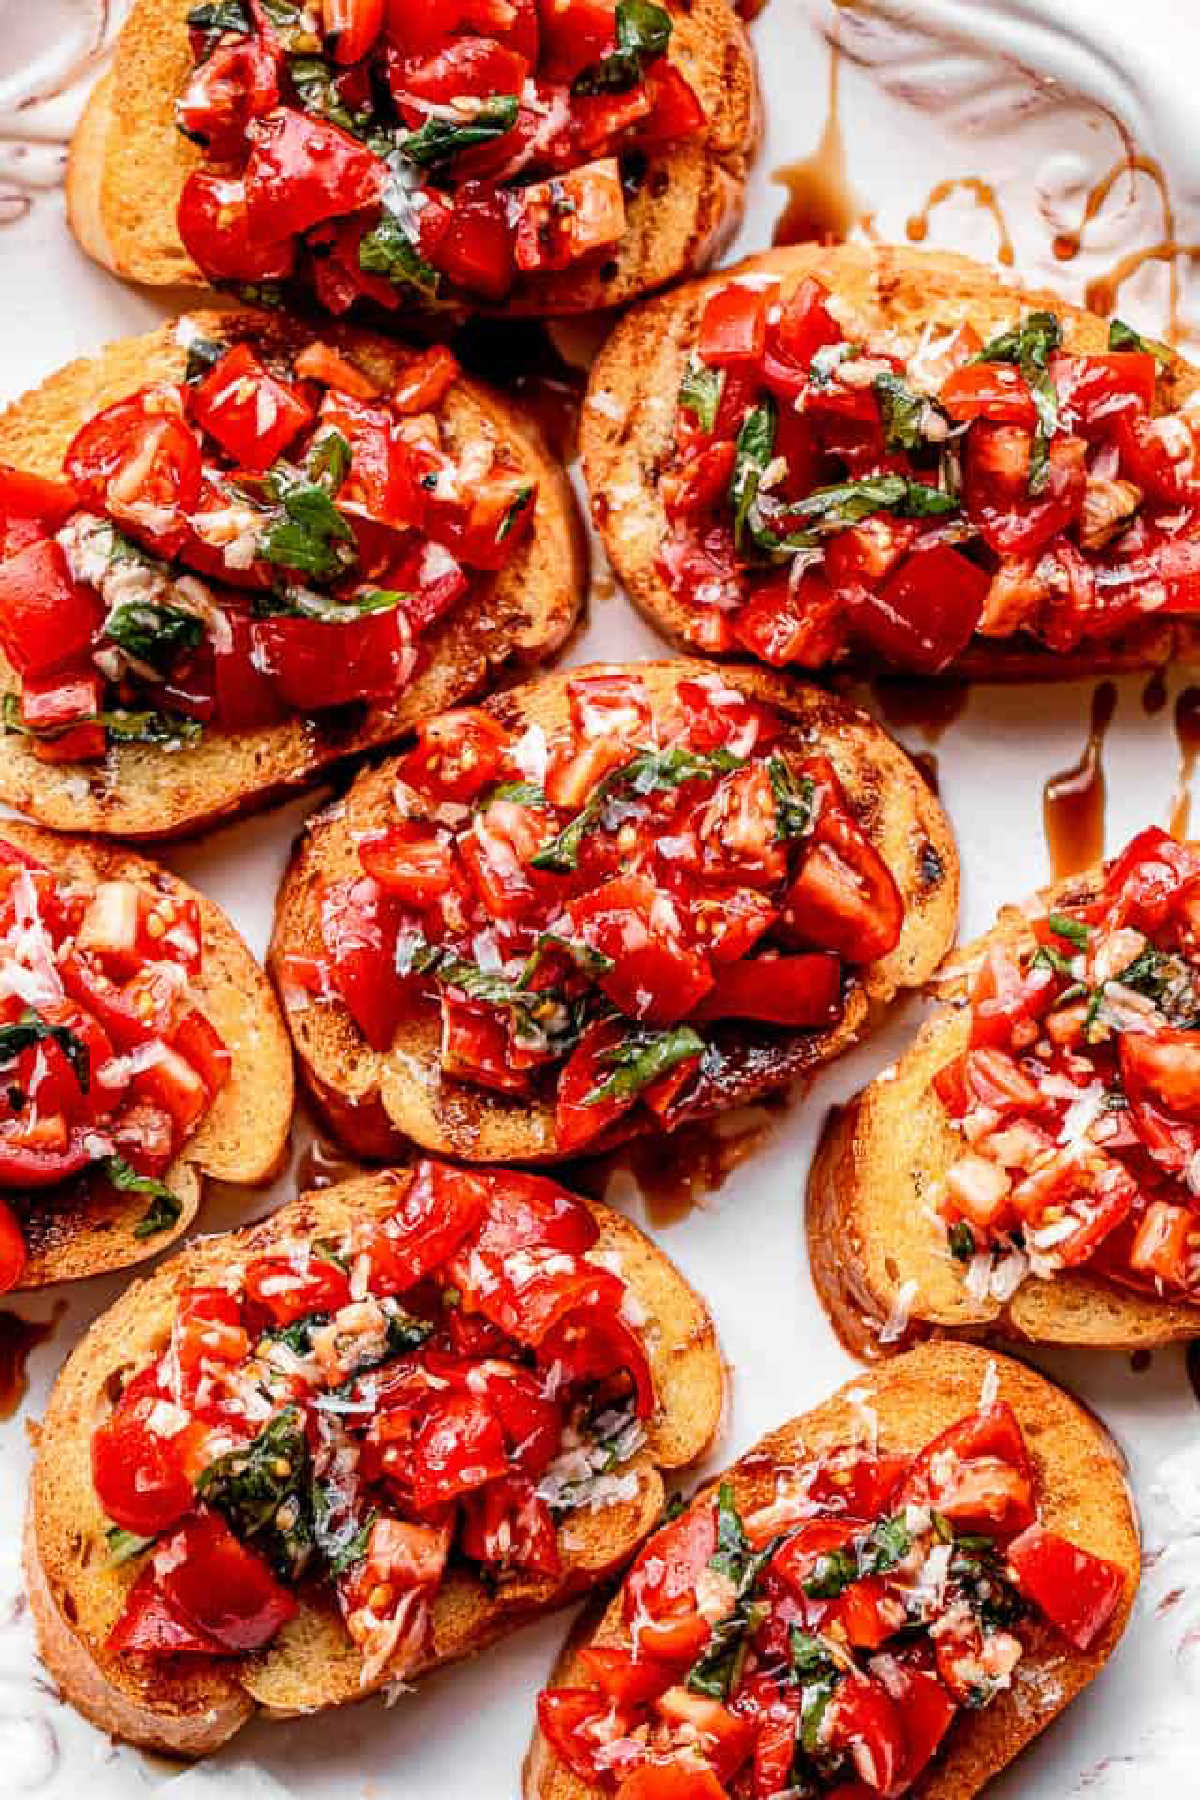 Bruschetta with Tomatoes and Basil - a tasty and cheap party food idea